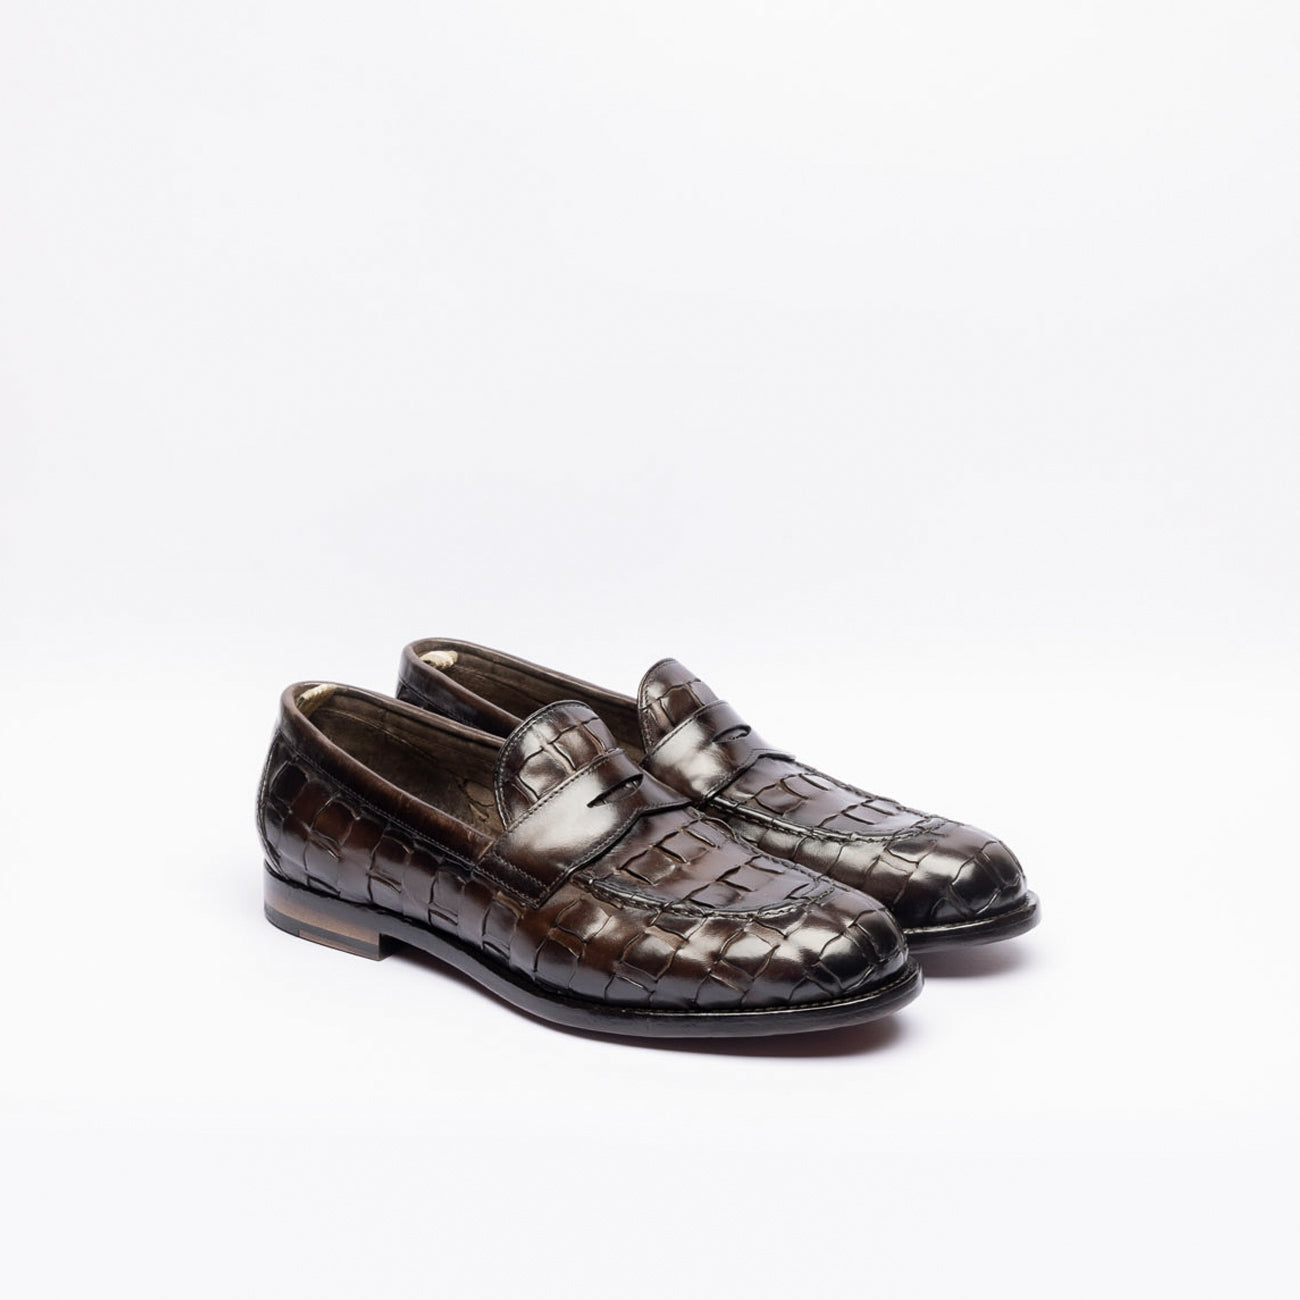 Penny loafer Officine Creative Ivy/016 in brown woven leather